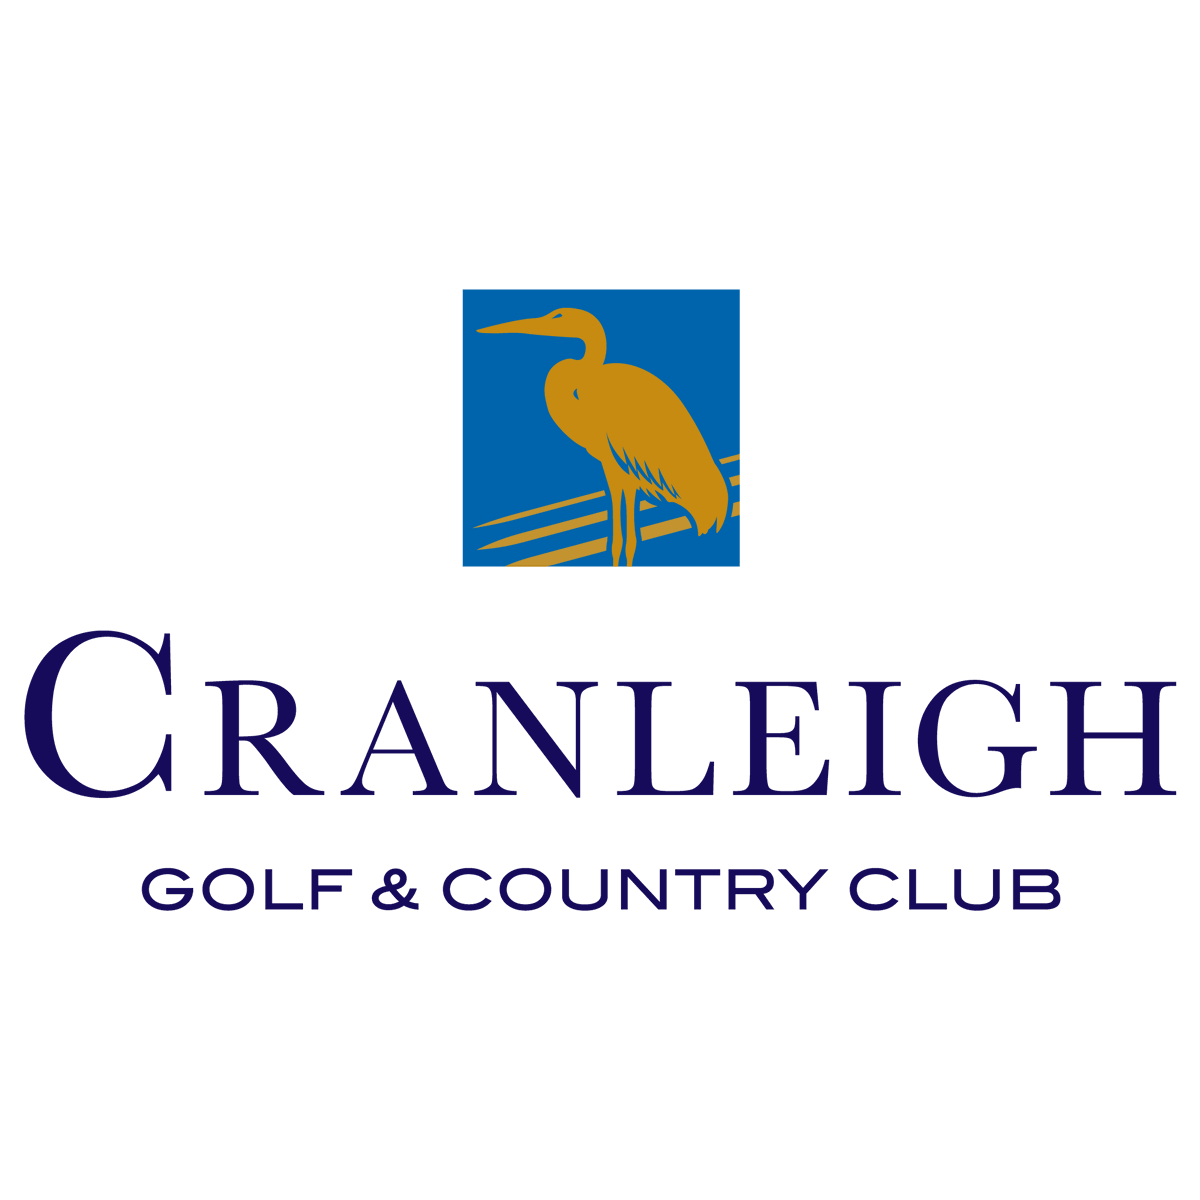 Yesterday was National Golf Day and we’d like to thank our friends at #Cranleigh Golf Club who are hosting our event this Saturday! 
We will be there from 11.30am until 3pm 
Book your PSA test here: cts.mypsatests.org.uk 
#cancertestingsouth #cancertesting #smallcharity